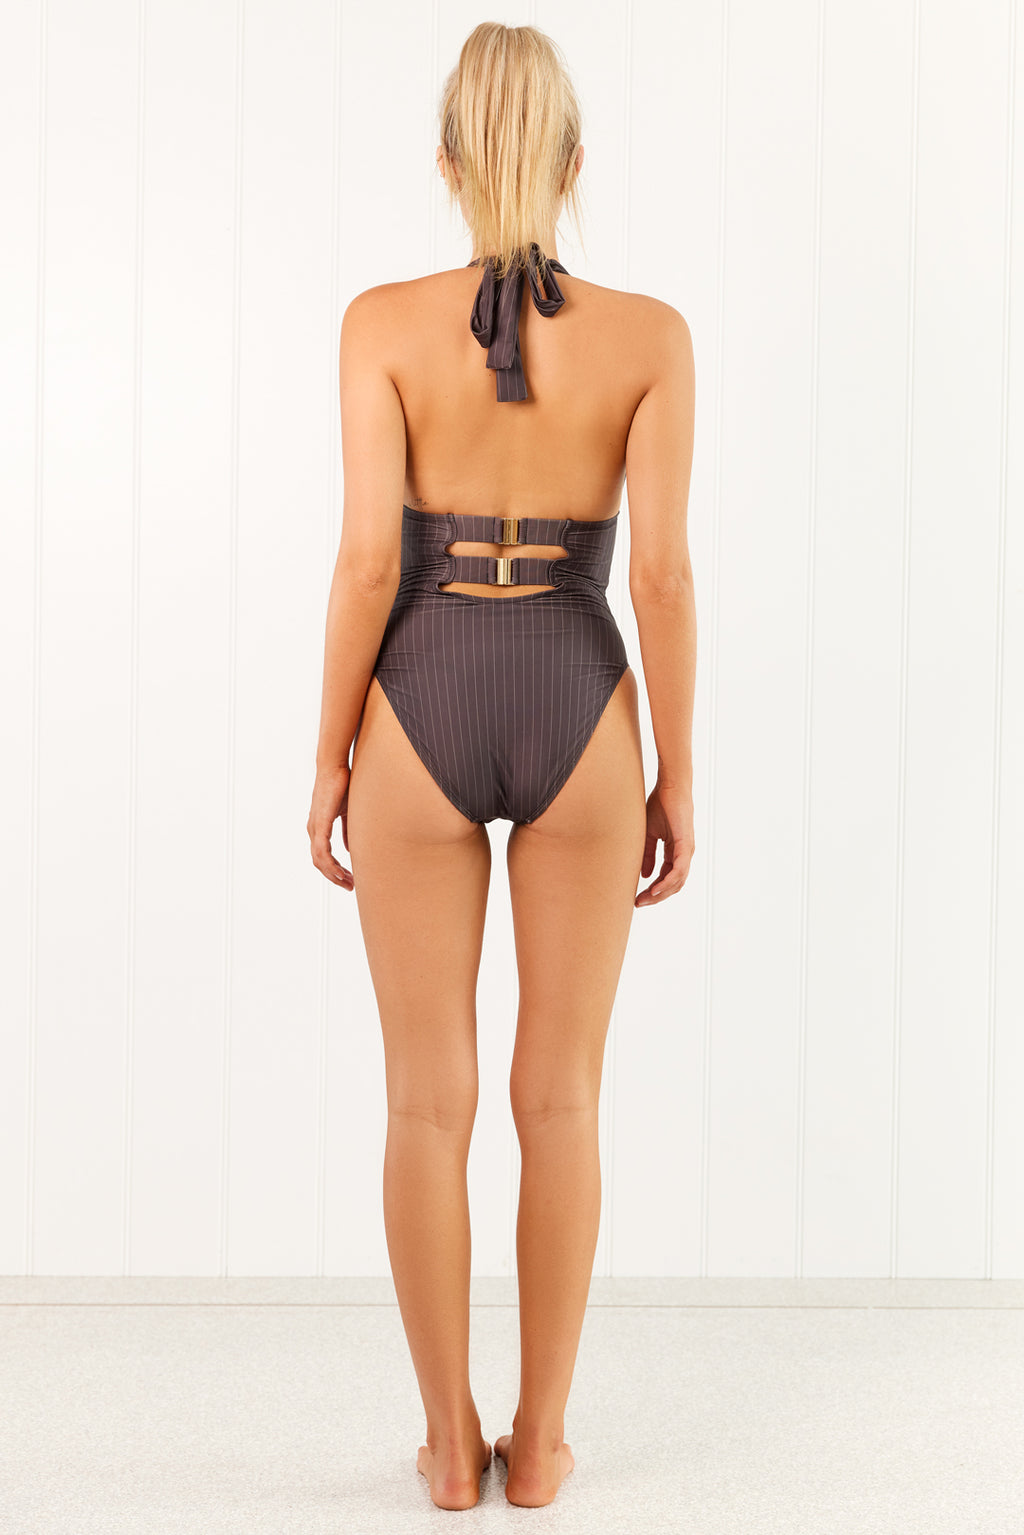 PERRY MAILLOT - CHOCOLATE PINSTRIPE